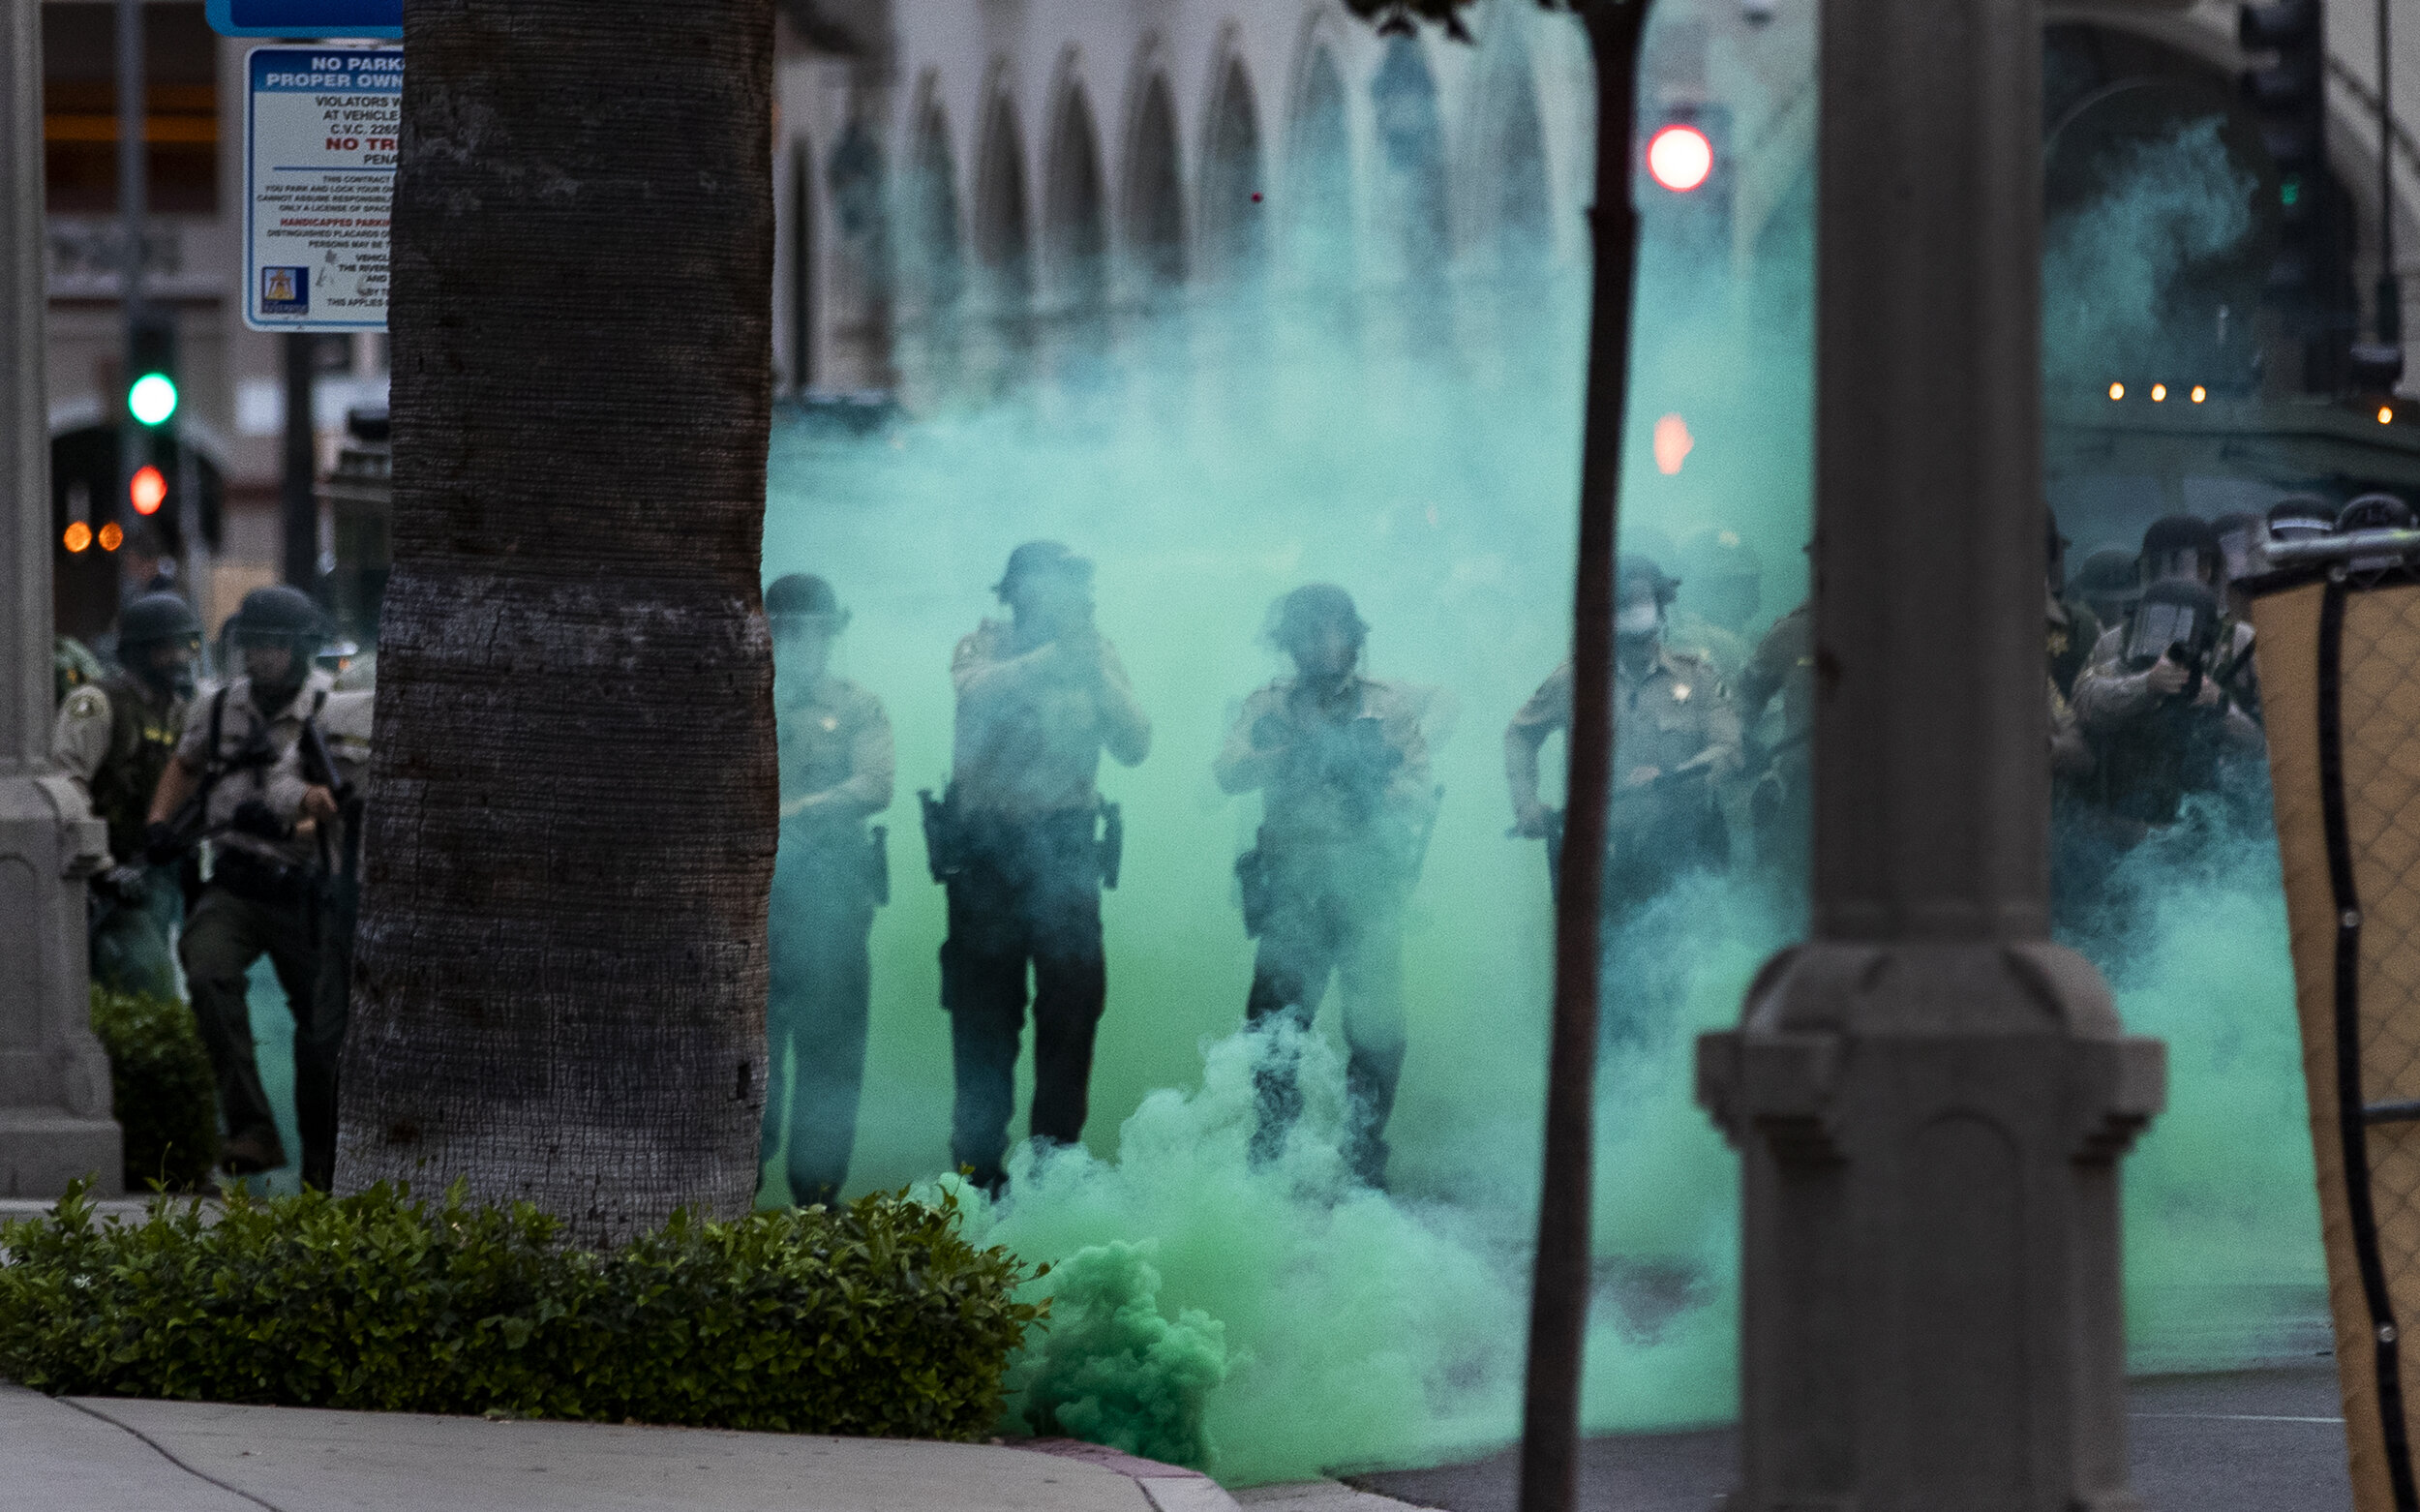  RIVERSIDE, CA - JUNE 1, 2020: Riverside County Sheriffs fire tear gas towards protesters after they moved a fence into the street during the coronavirus pandemic on June 1, 2020 in Riverside, California. Thousands of protesters marched through the s